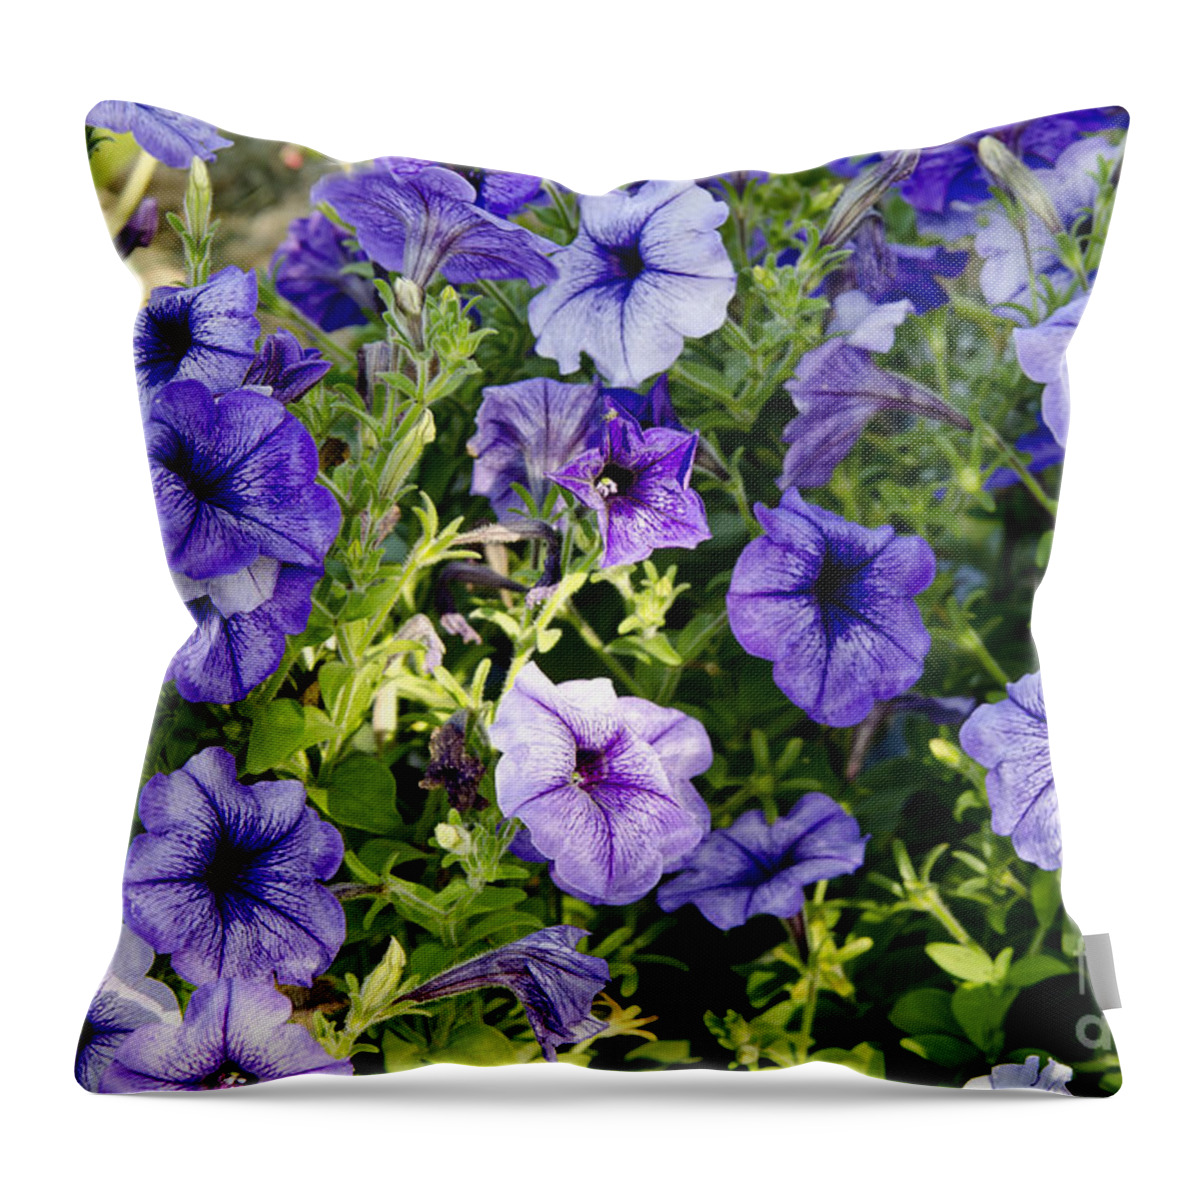 Petunias Throw Pillow featuring the photograph Happy Flowers by Wilma Birdwell